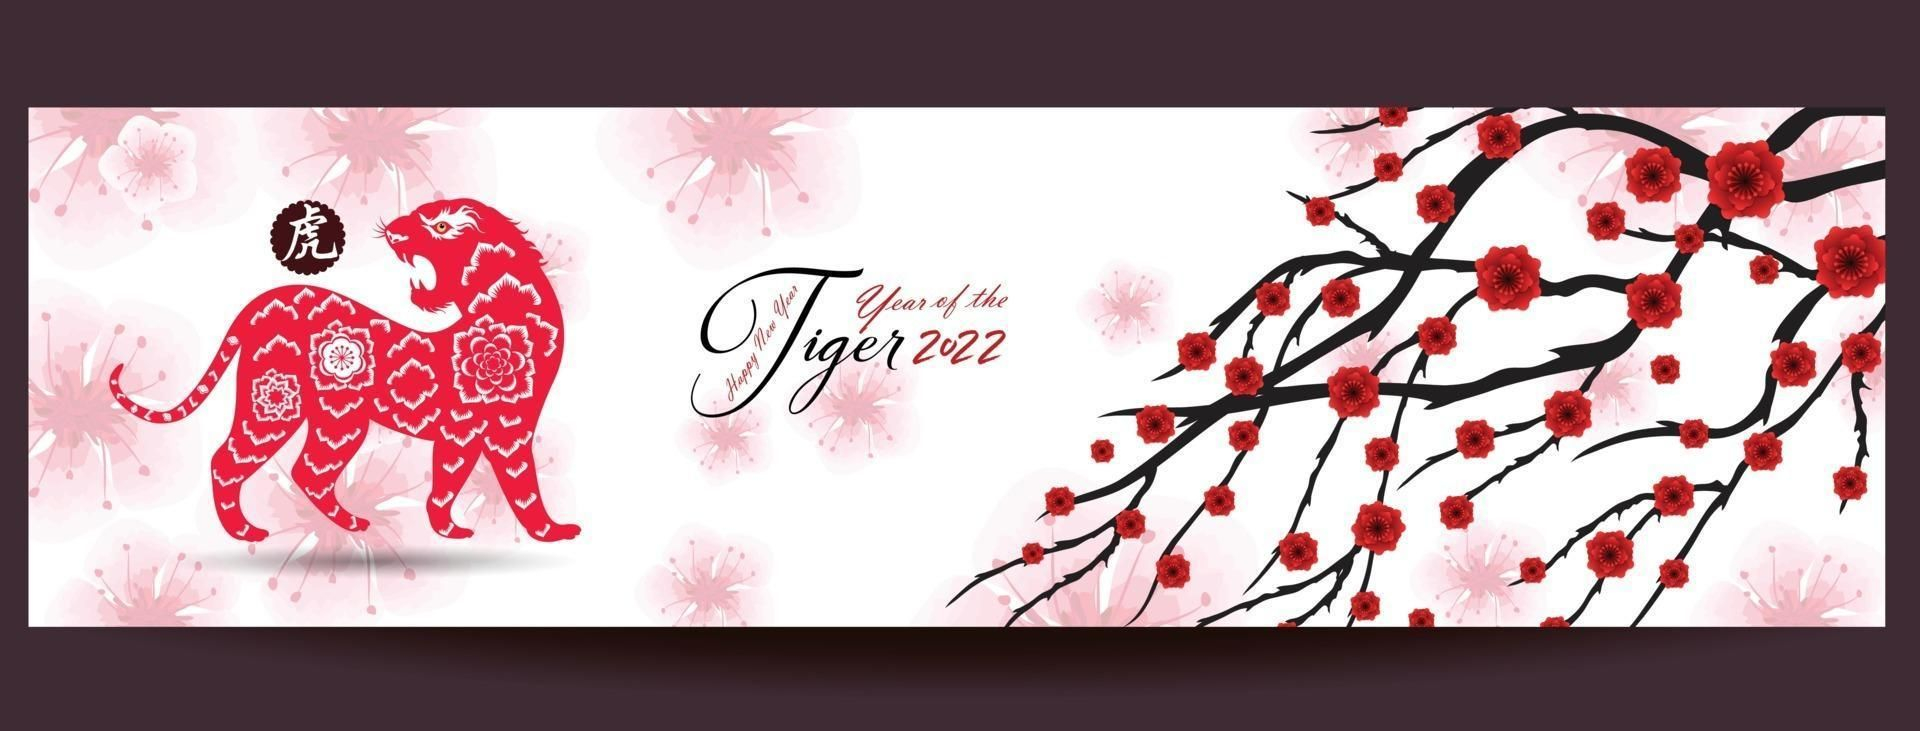 Happy Chinese New Year 2022 - Year Of The Tiger. Lunar New